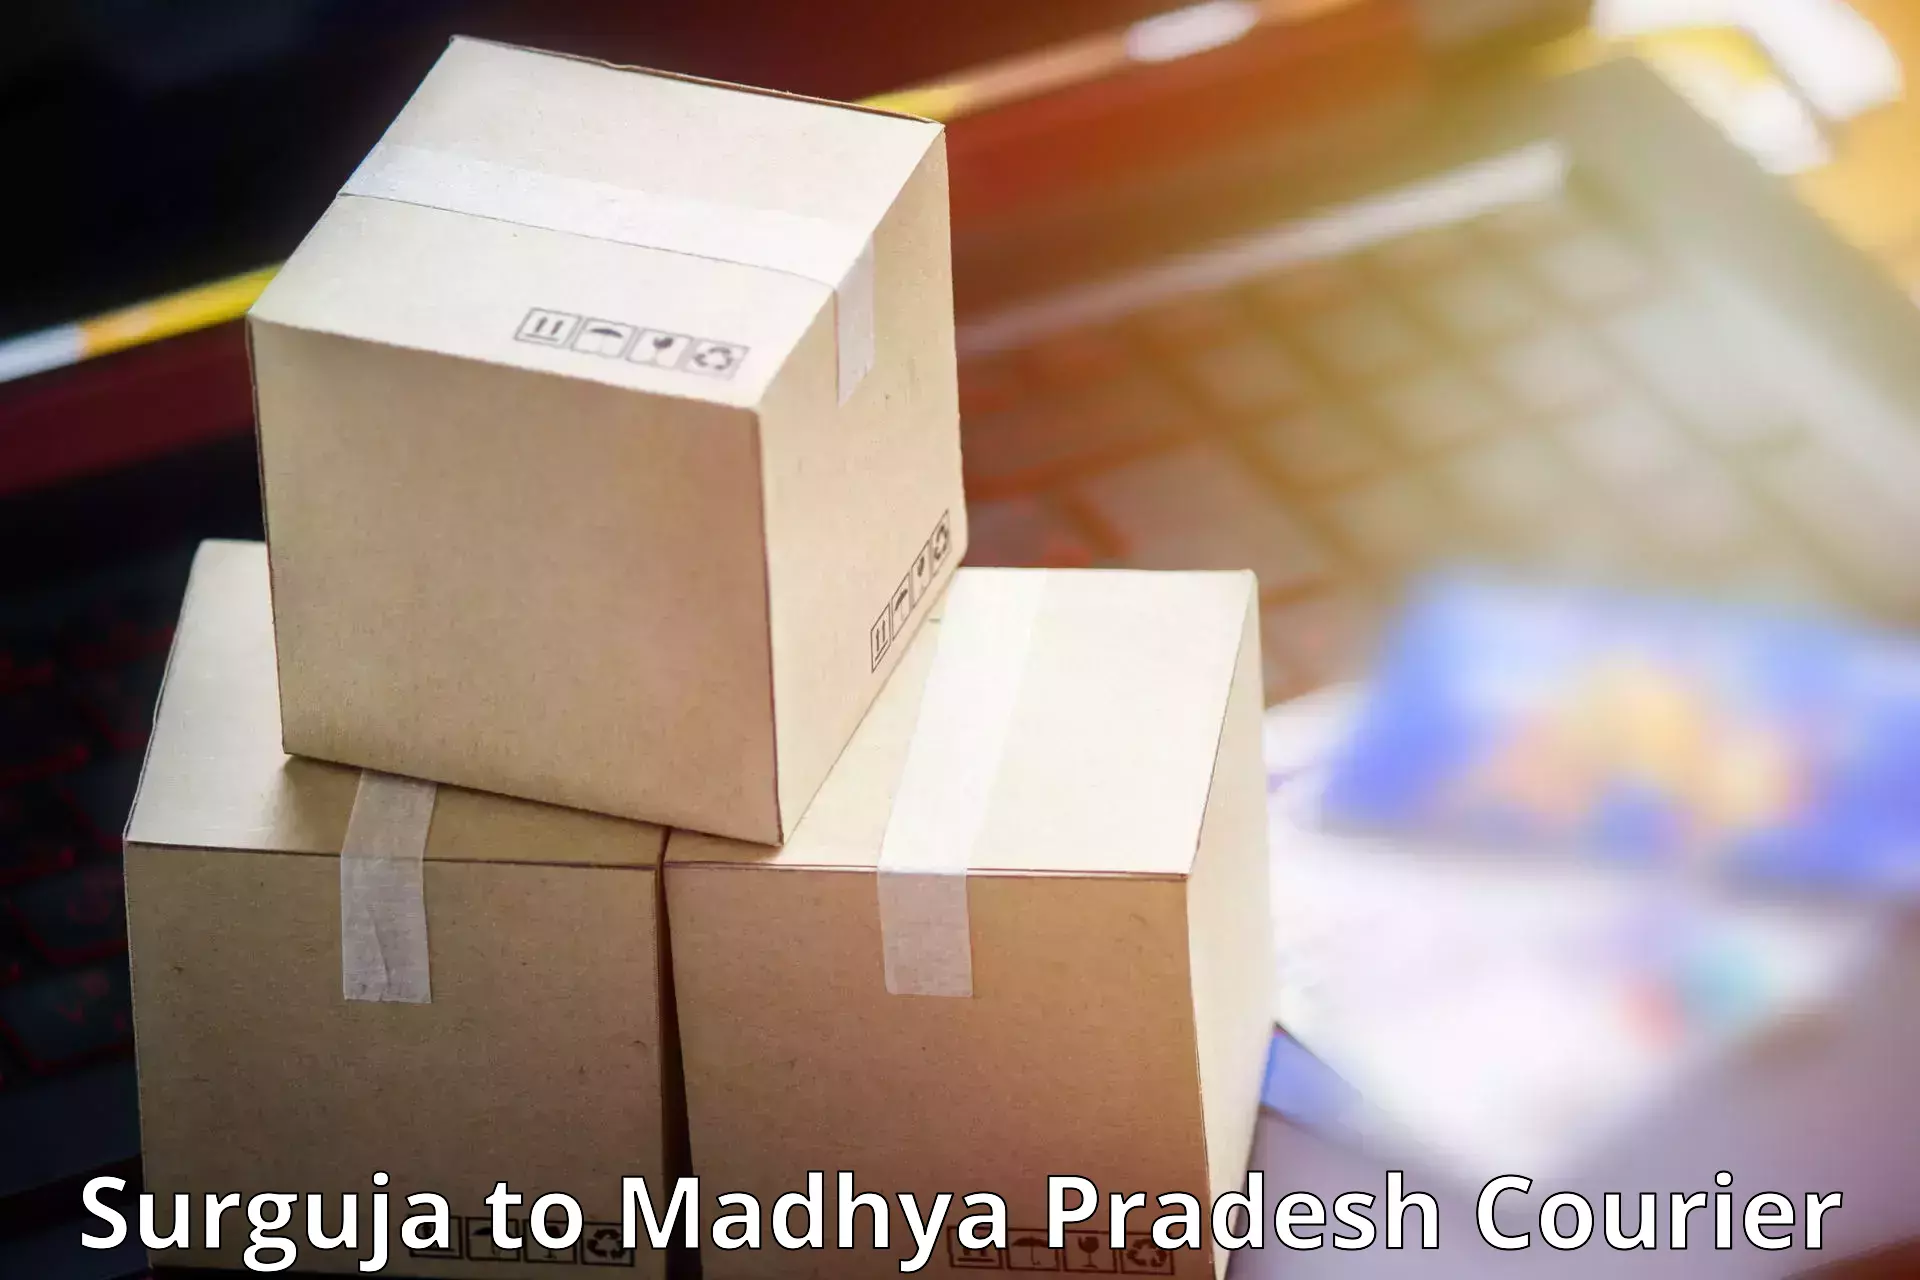 Reliable courier service Surguja to Harda